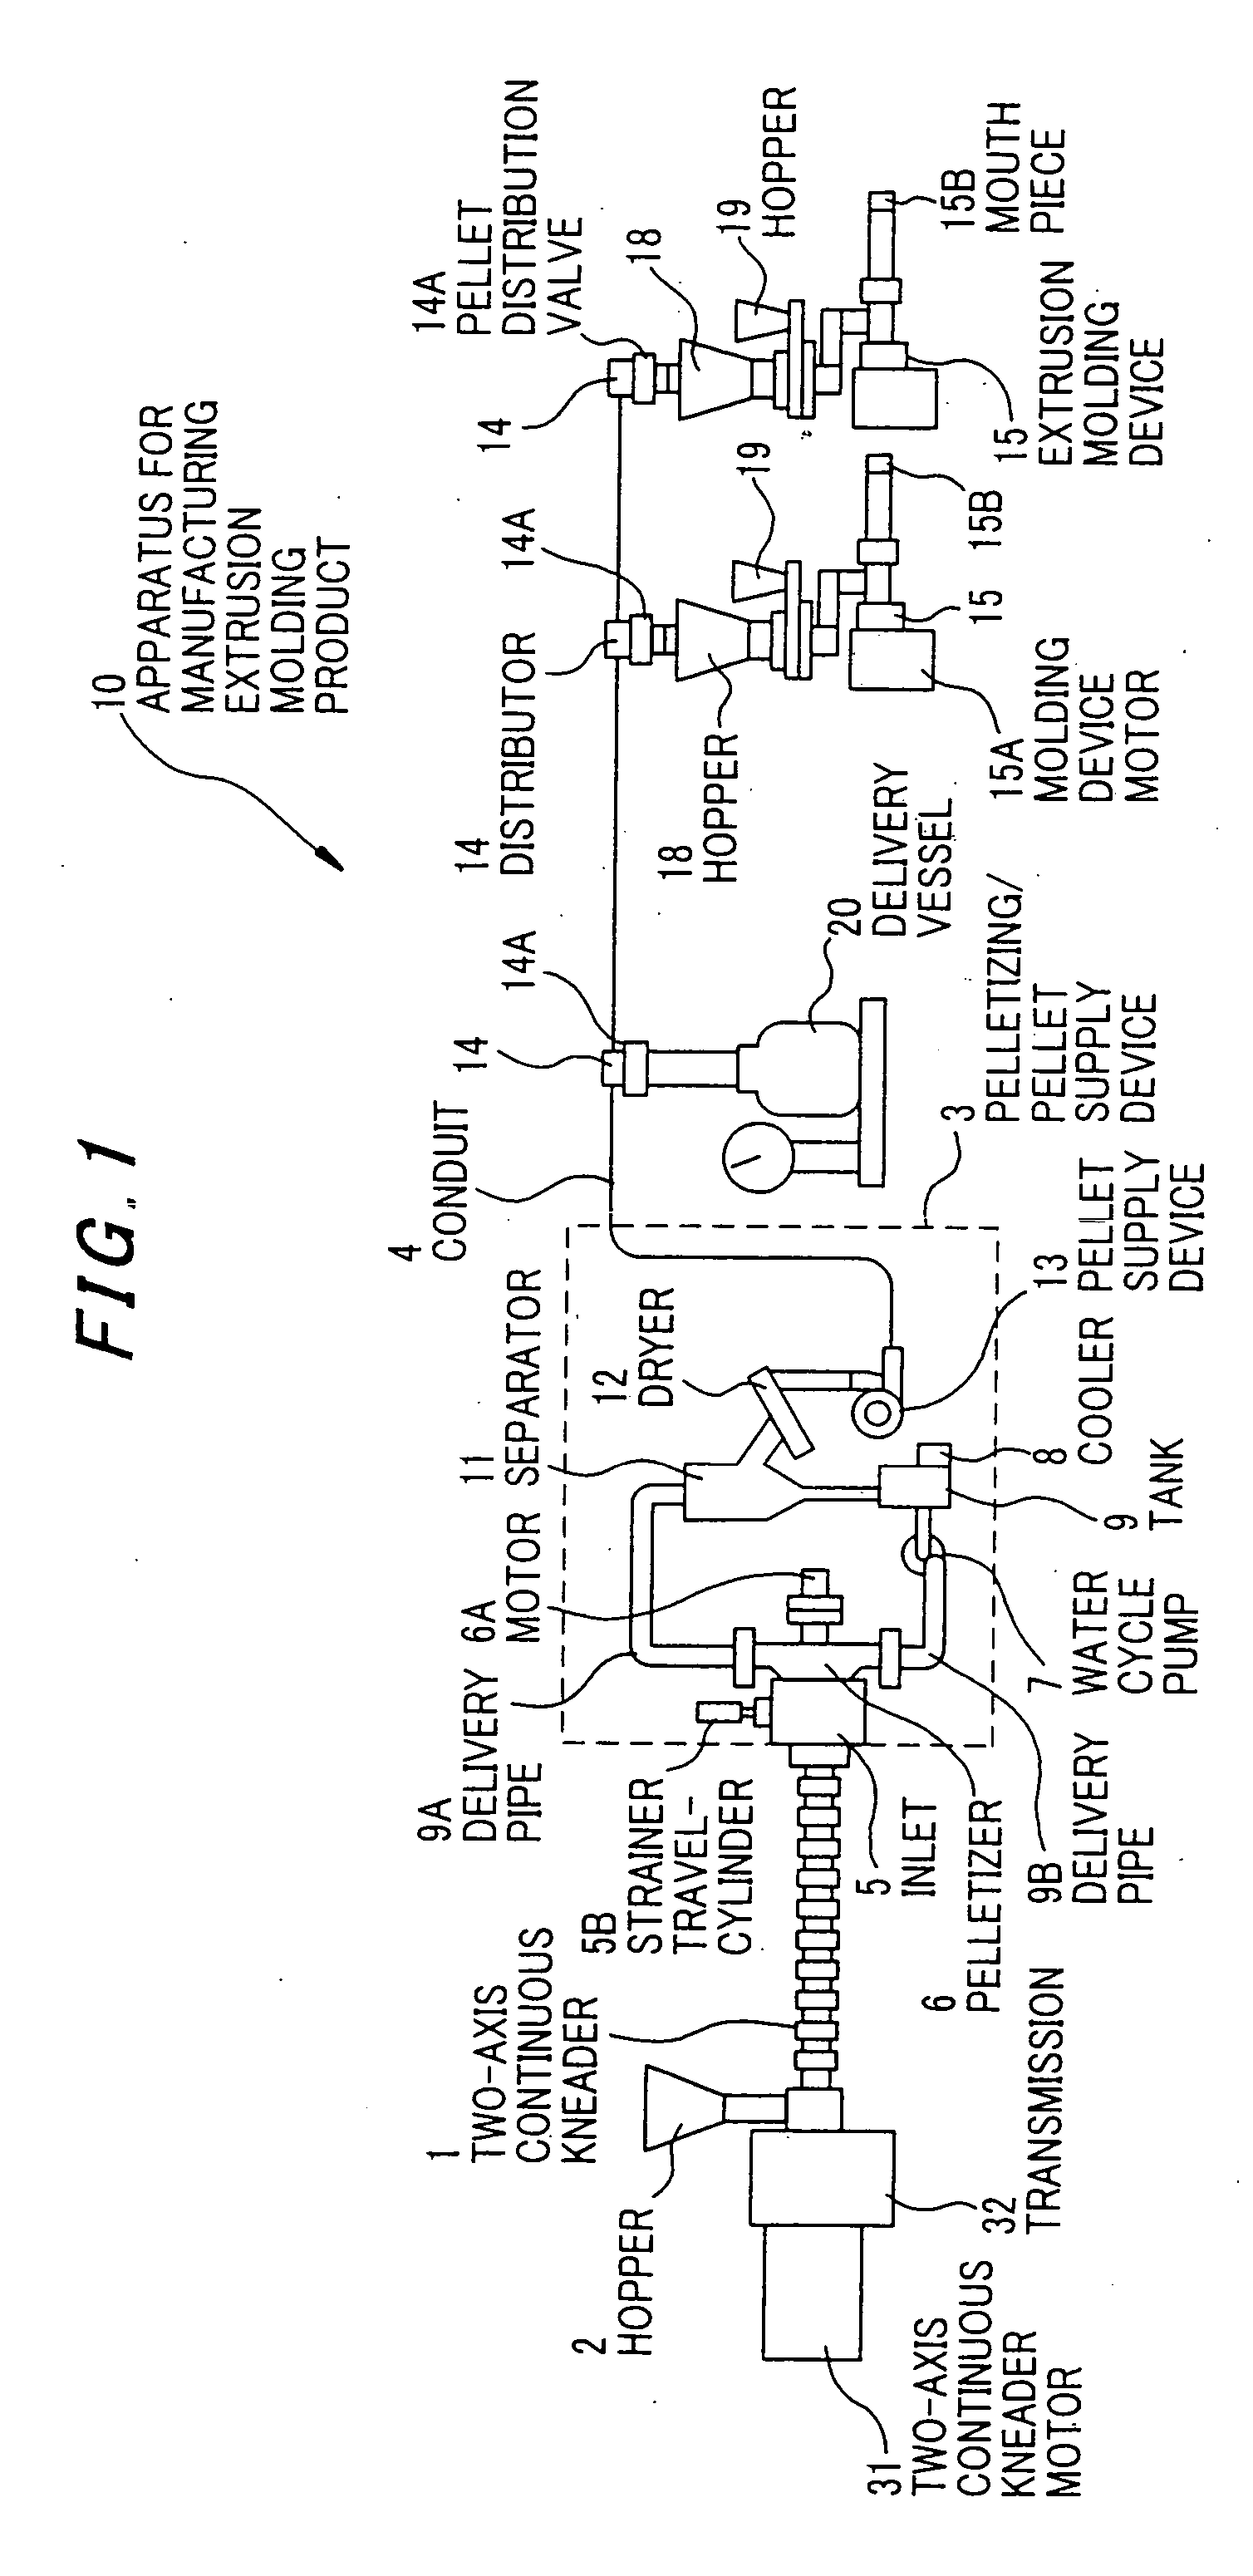 Method and apparatus for molding rubber